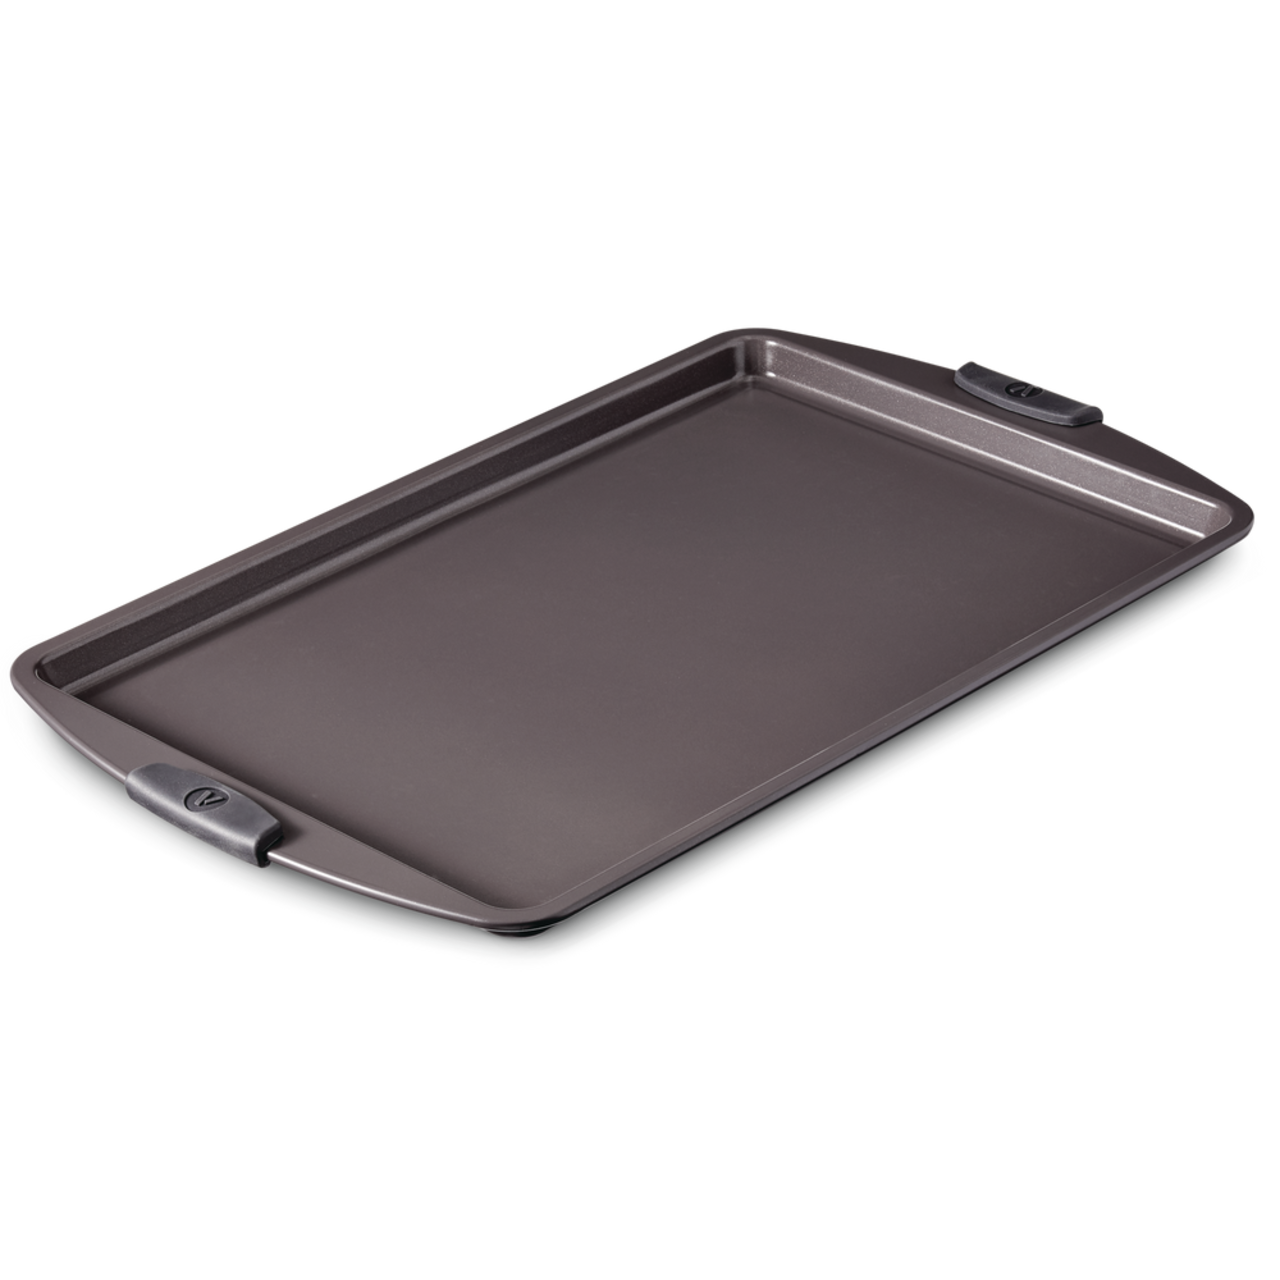 https://media-www.canadiantire.ca/product/living/kitchen/bakeware-baking-prep/1429594/vida-large-cookie-sheet-17-25-x-11-25--58064a31-643c-4508-aa61-fbc8d72a8ff5.png?imdensity=1&imwidth=640&impolicy=mZoom